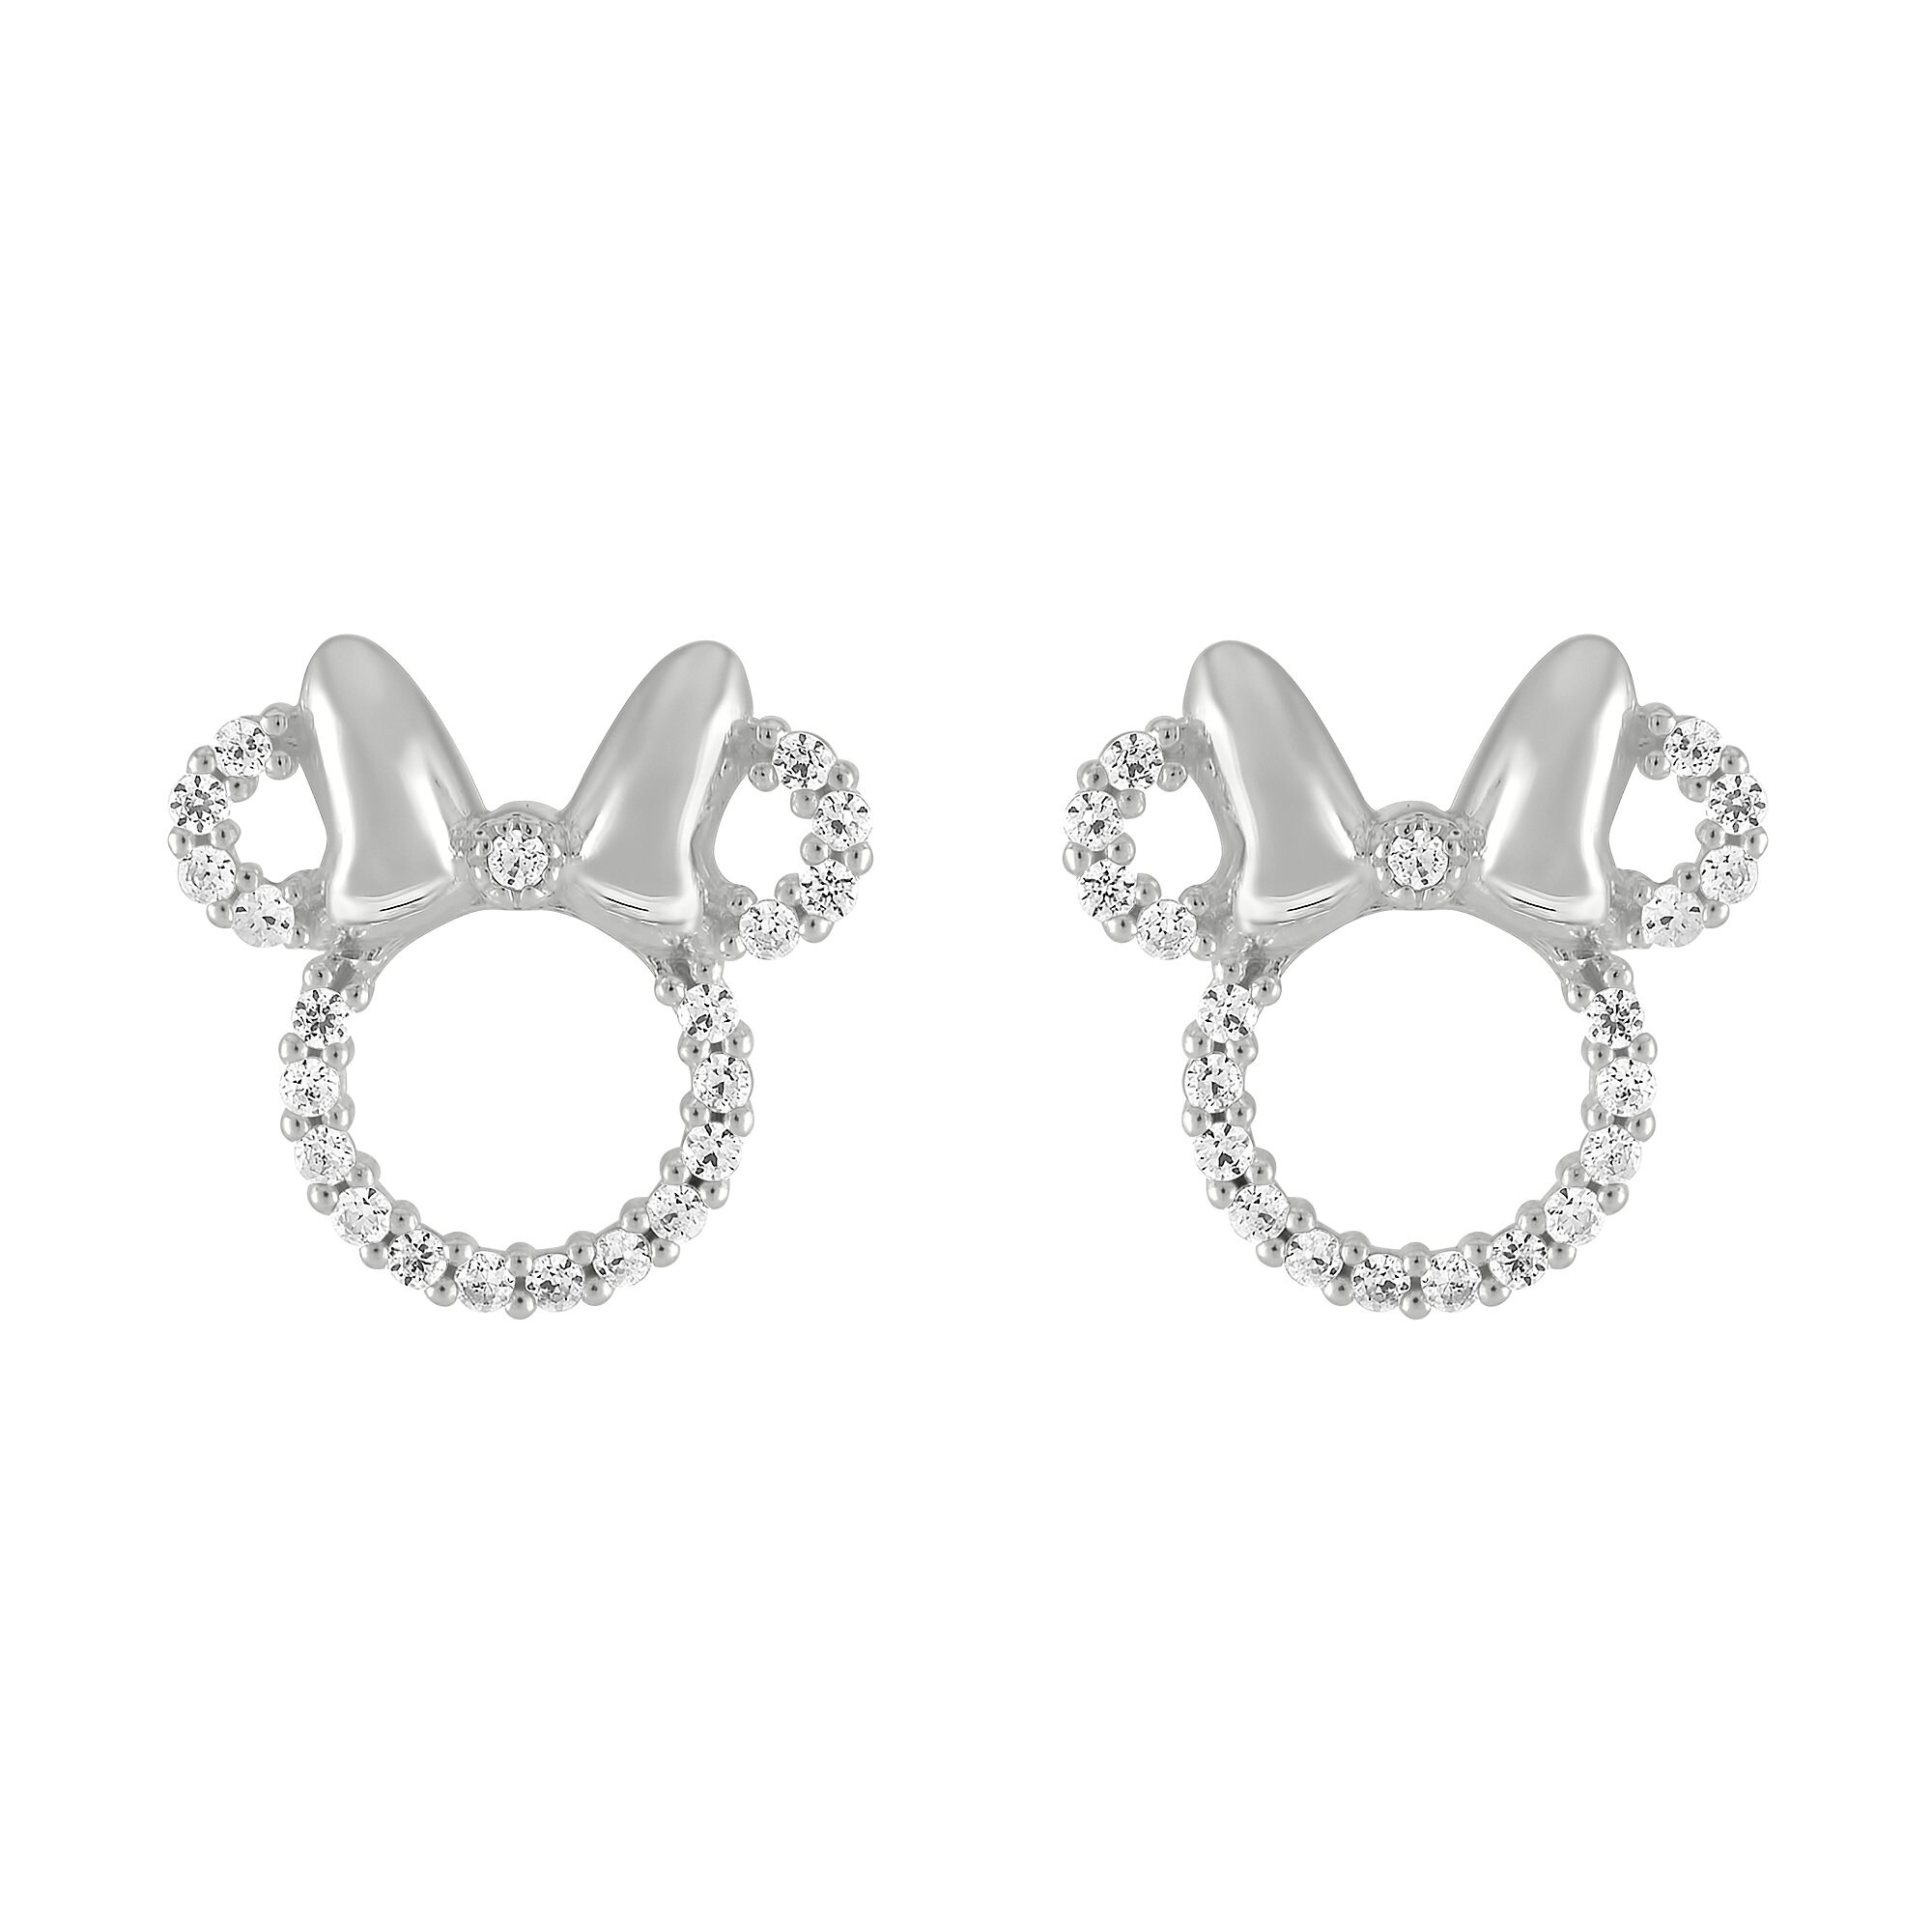 Minnie Mouse Sterling Silver Icon Earrings by Rebecca Hook